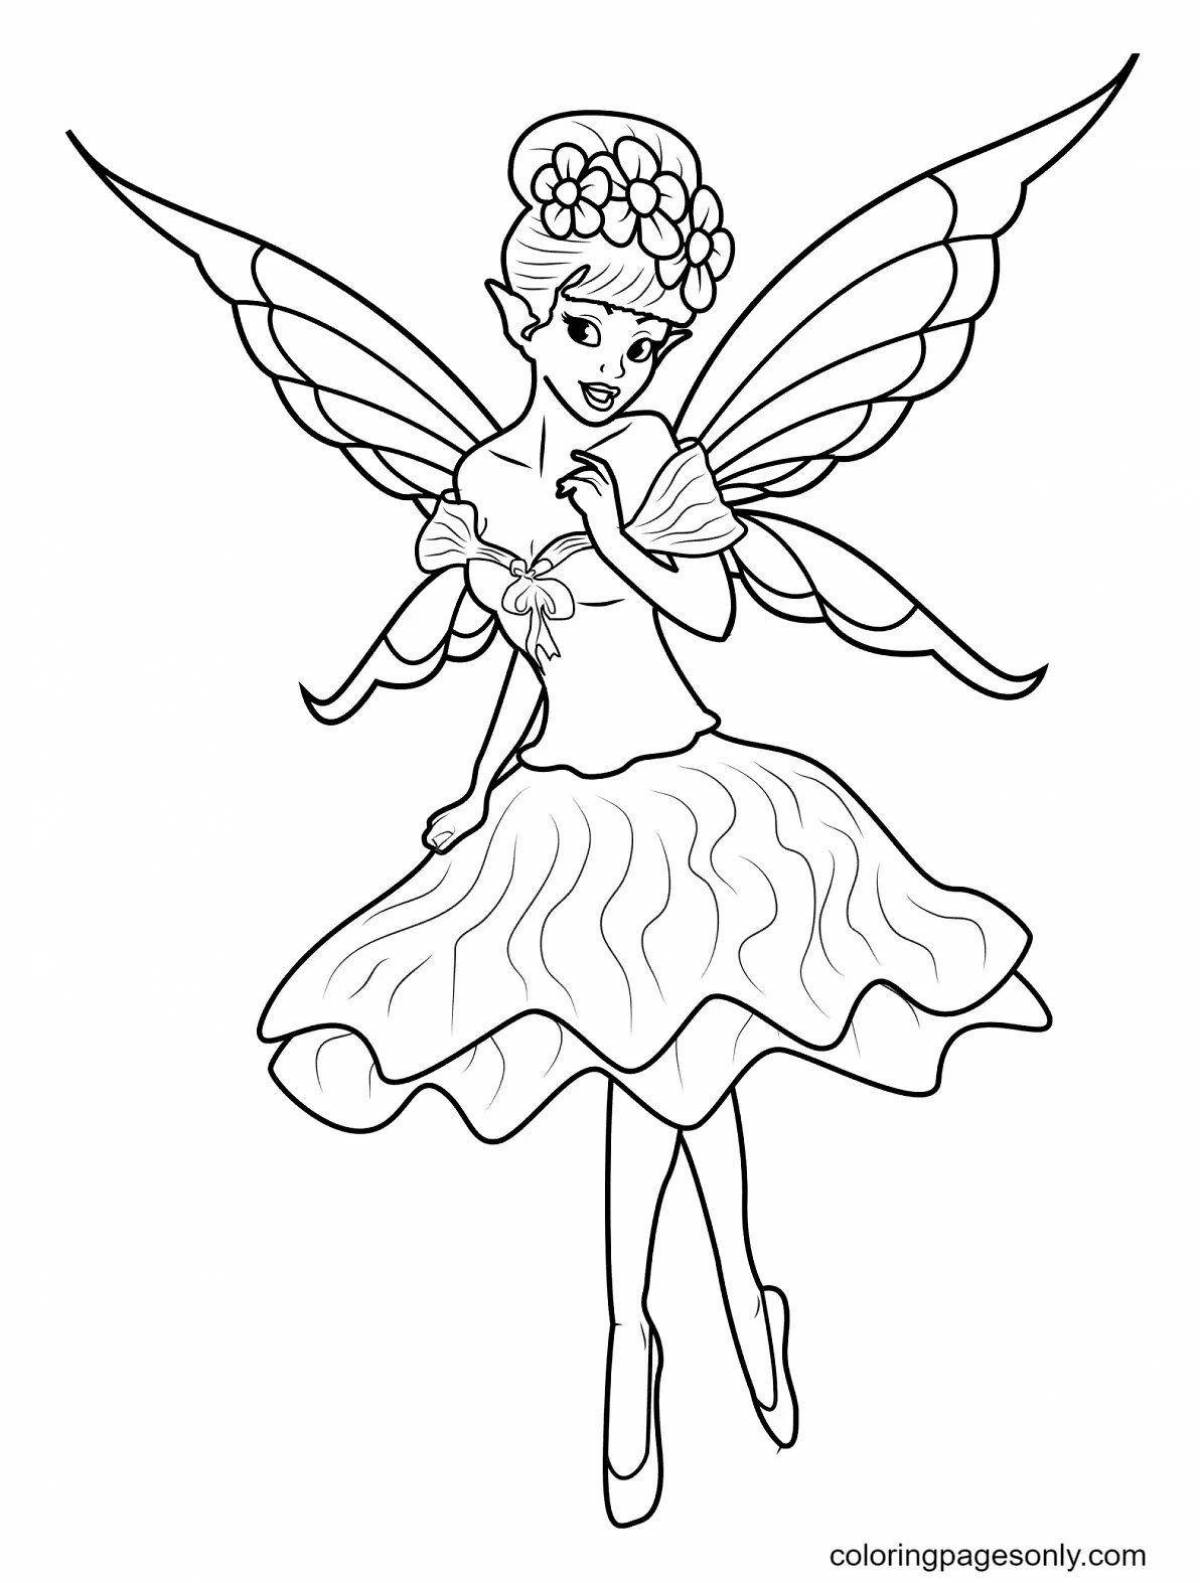 Funny coloring pages for children 6-7 years old fairies